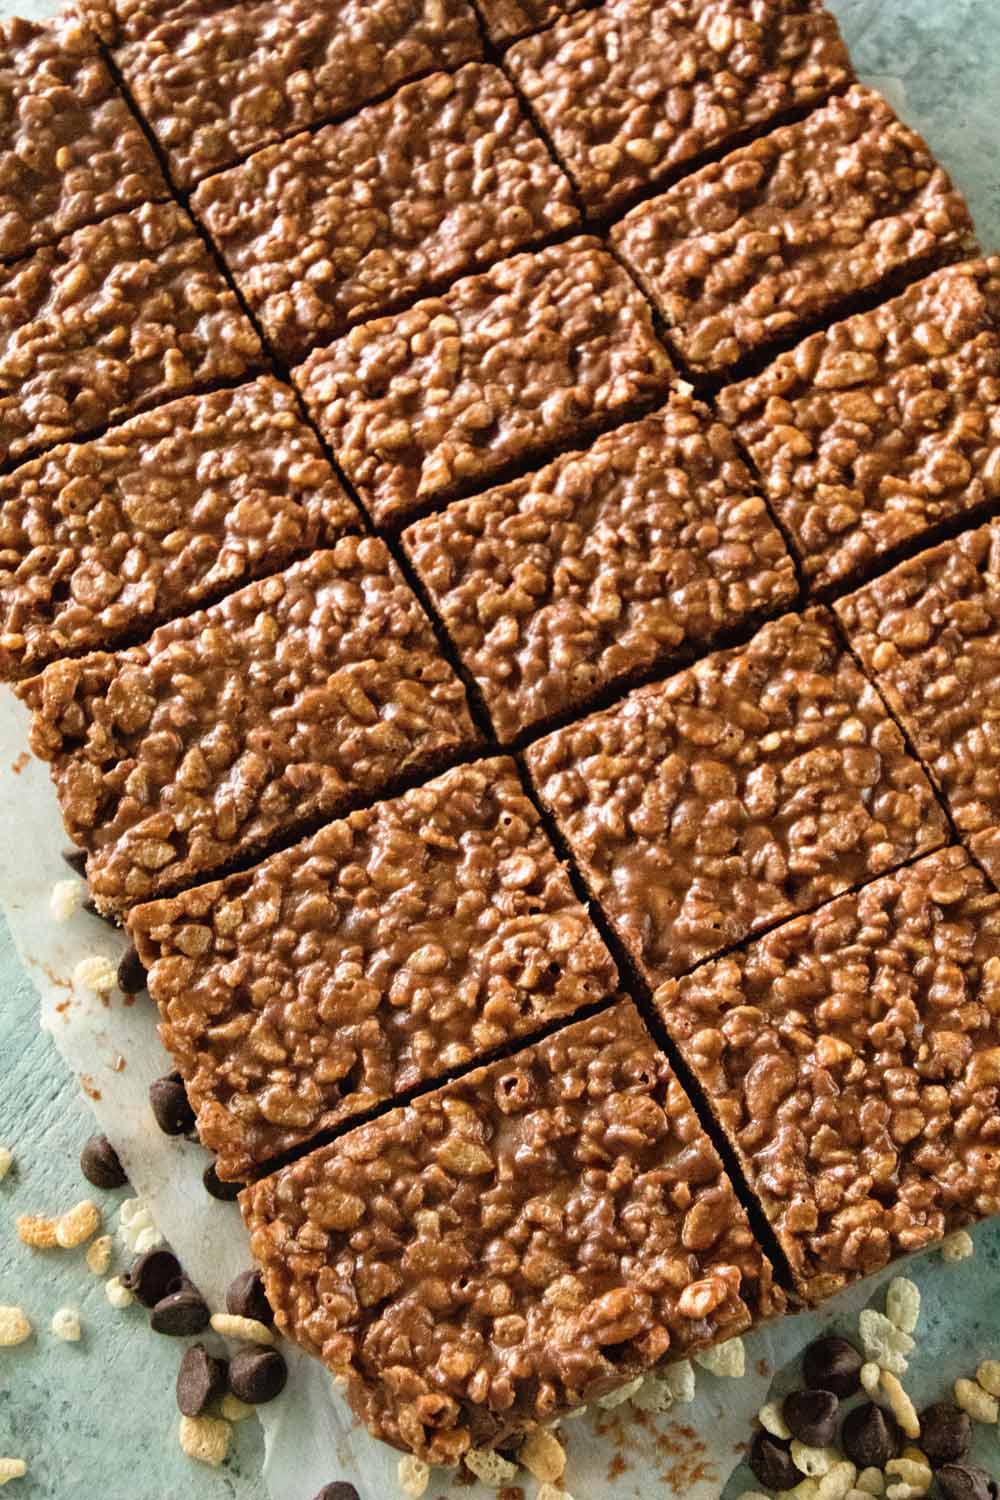 Dig into this Chocolate Peanut Butter Rice Krispies Bar Recipe!